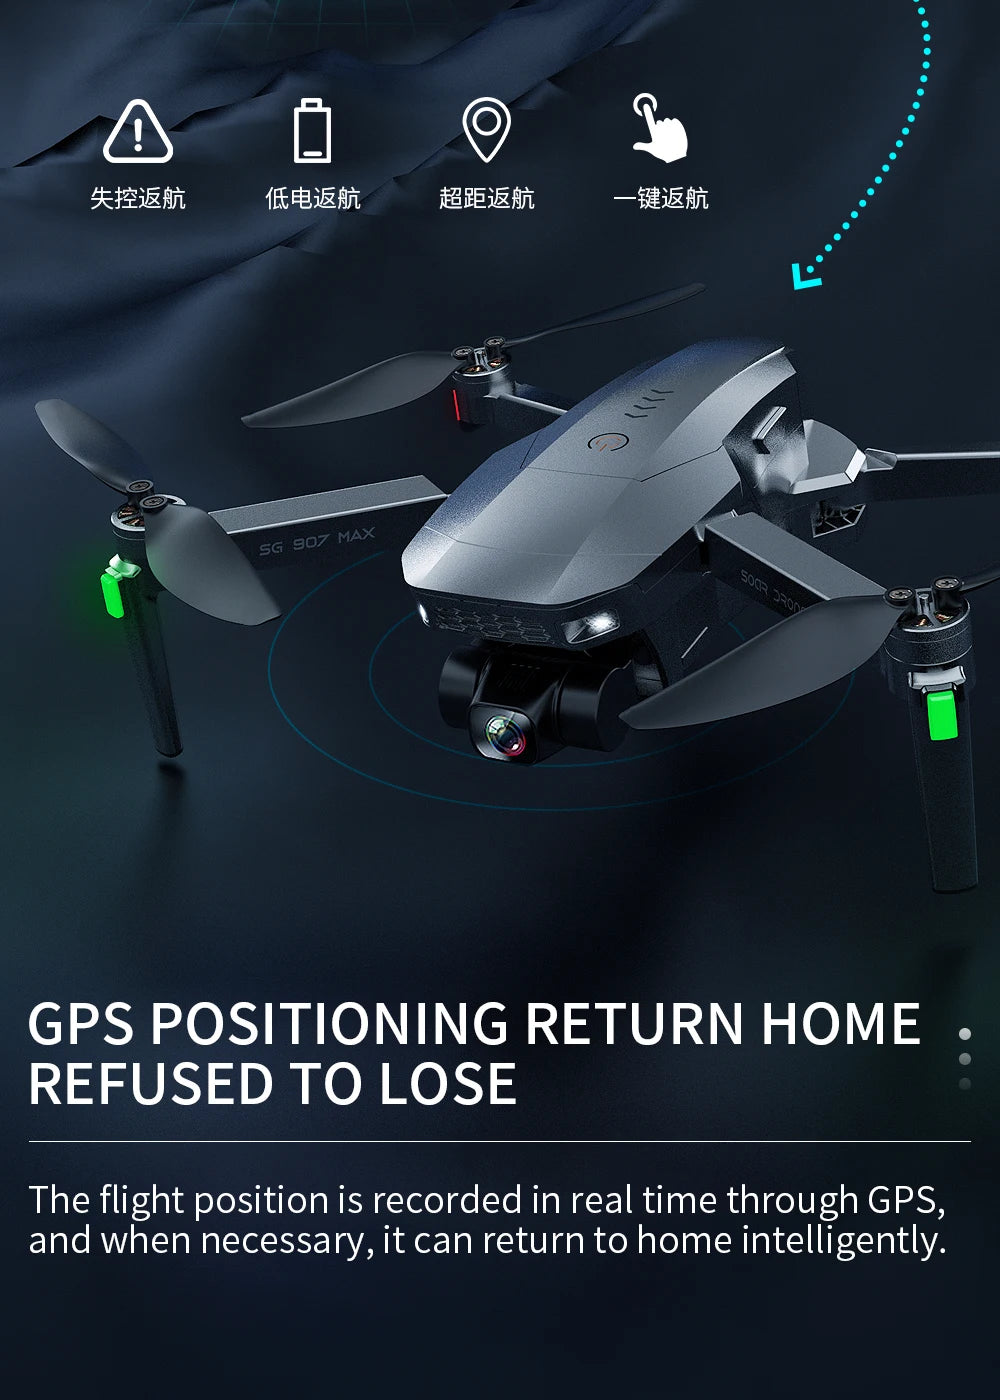 SG907 MAX Drone, GPS POSITIONING RETURN HOME REFUSED TO LOSE The flight